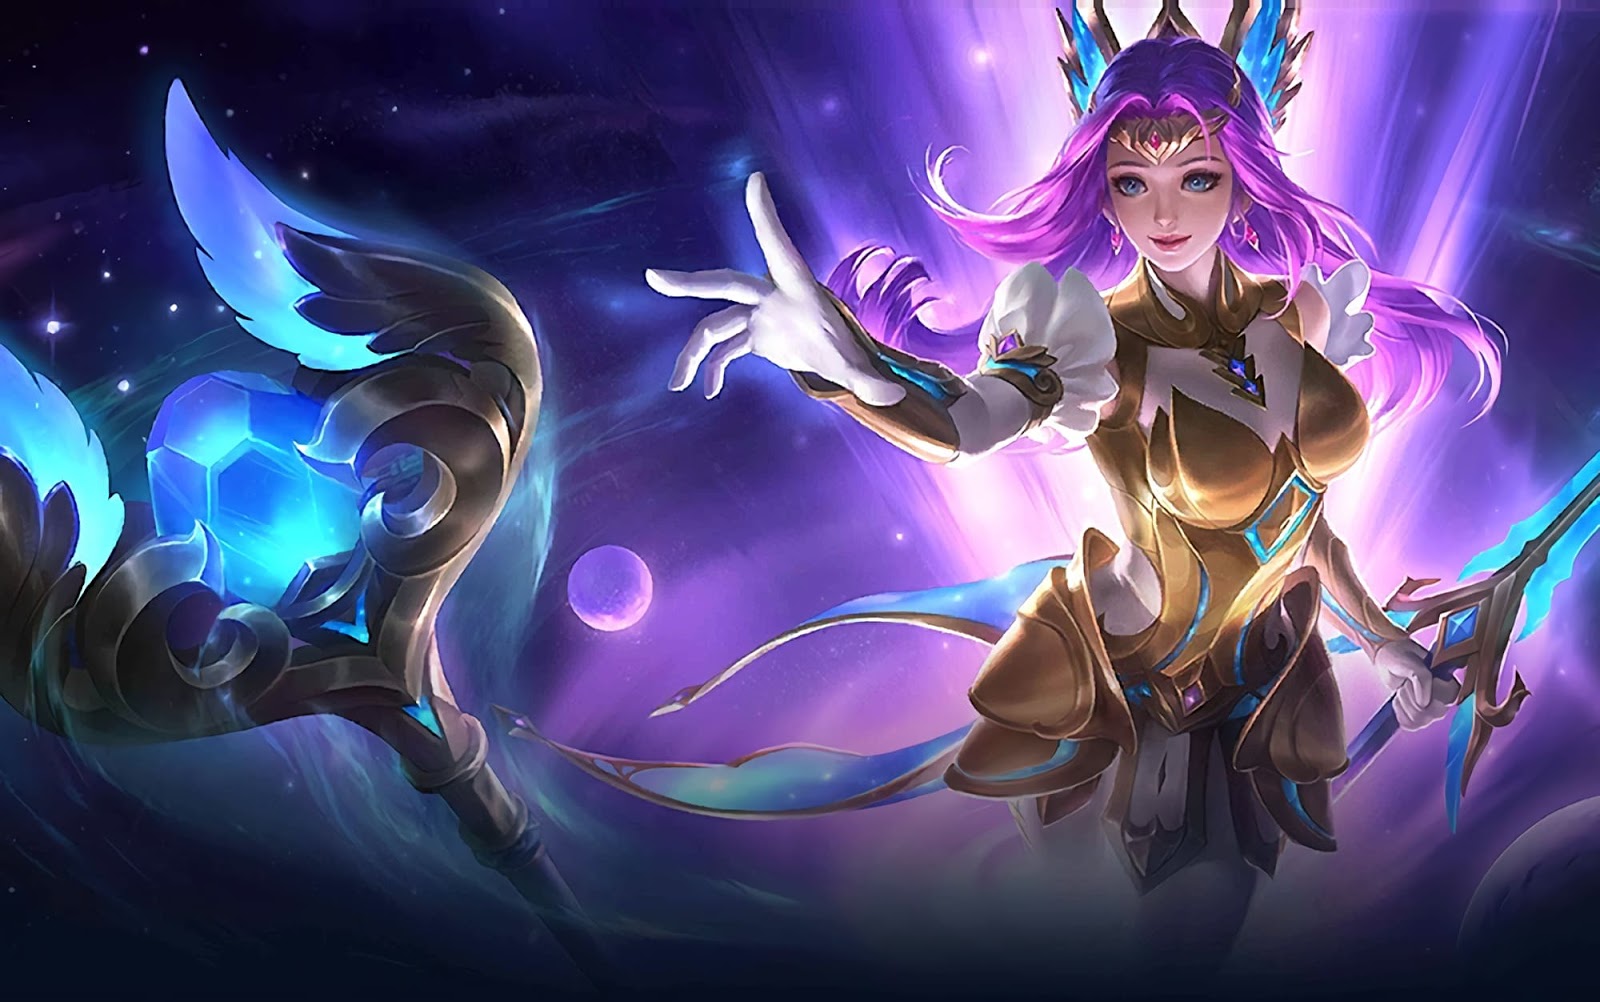 15+ Wallpaper Odette Mobile Legends Full HD for PC, Android & iOS